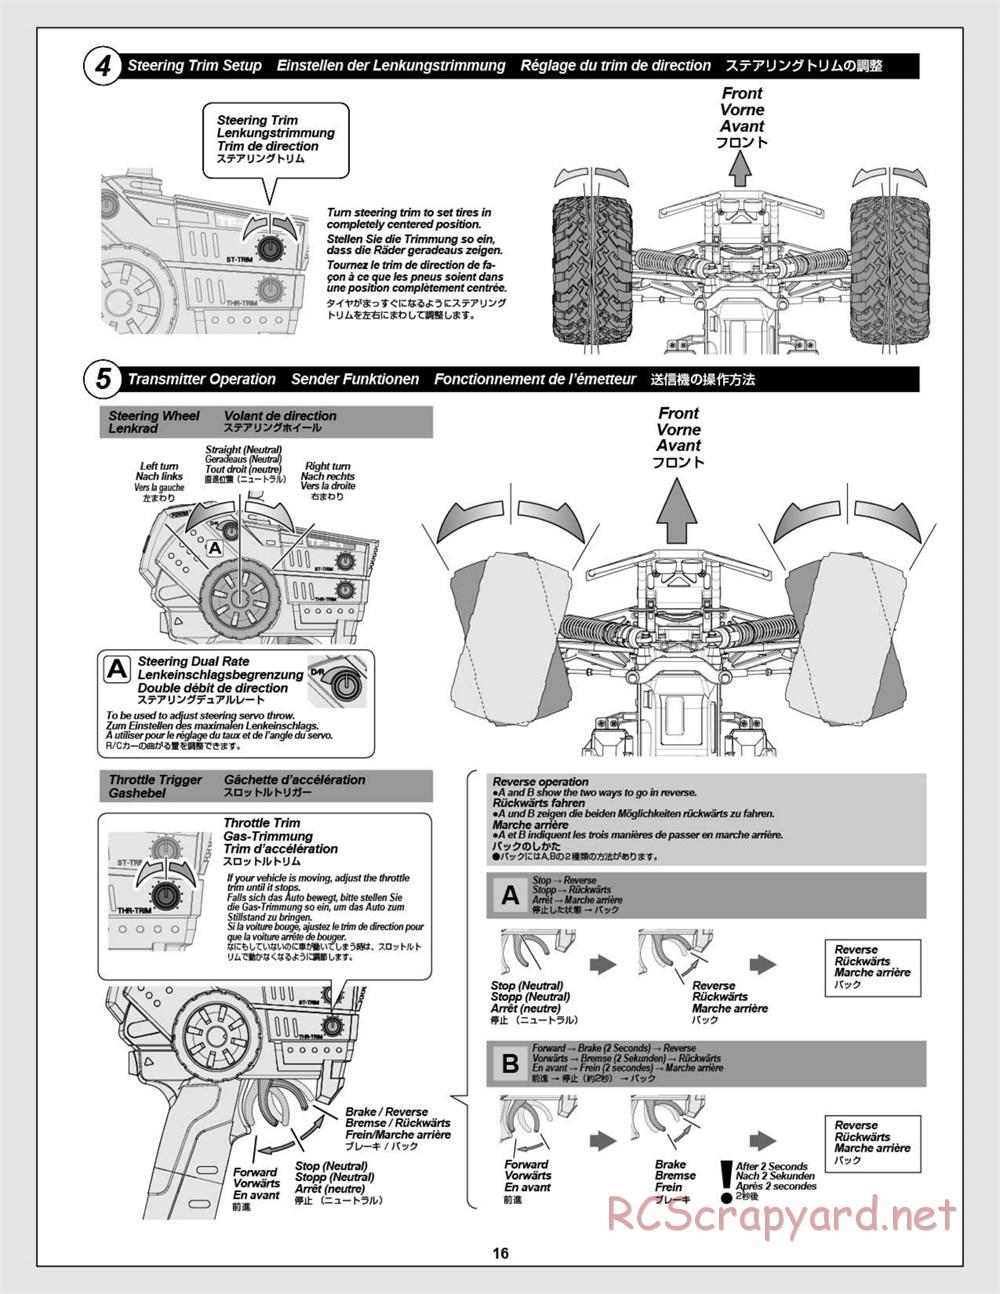 HPI - Savage Flux HP - Manual - Page 16